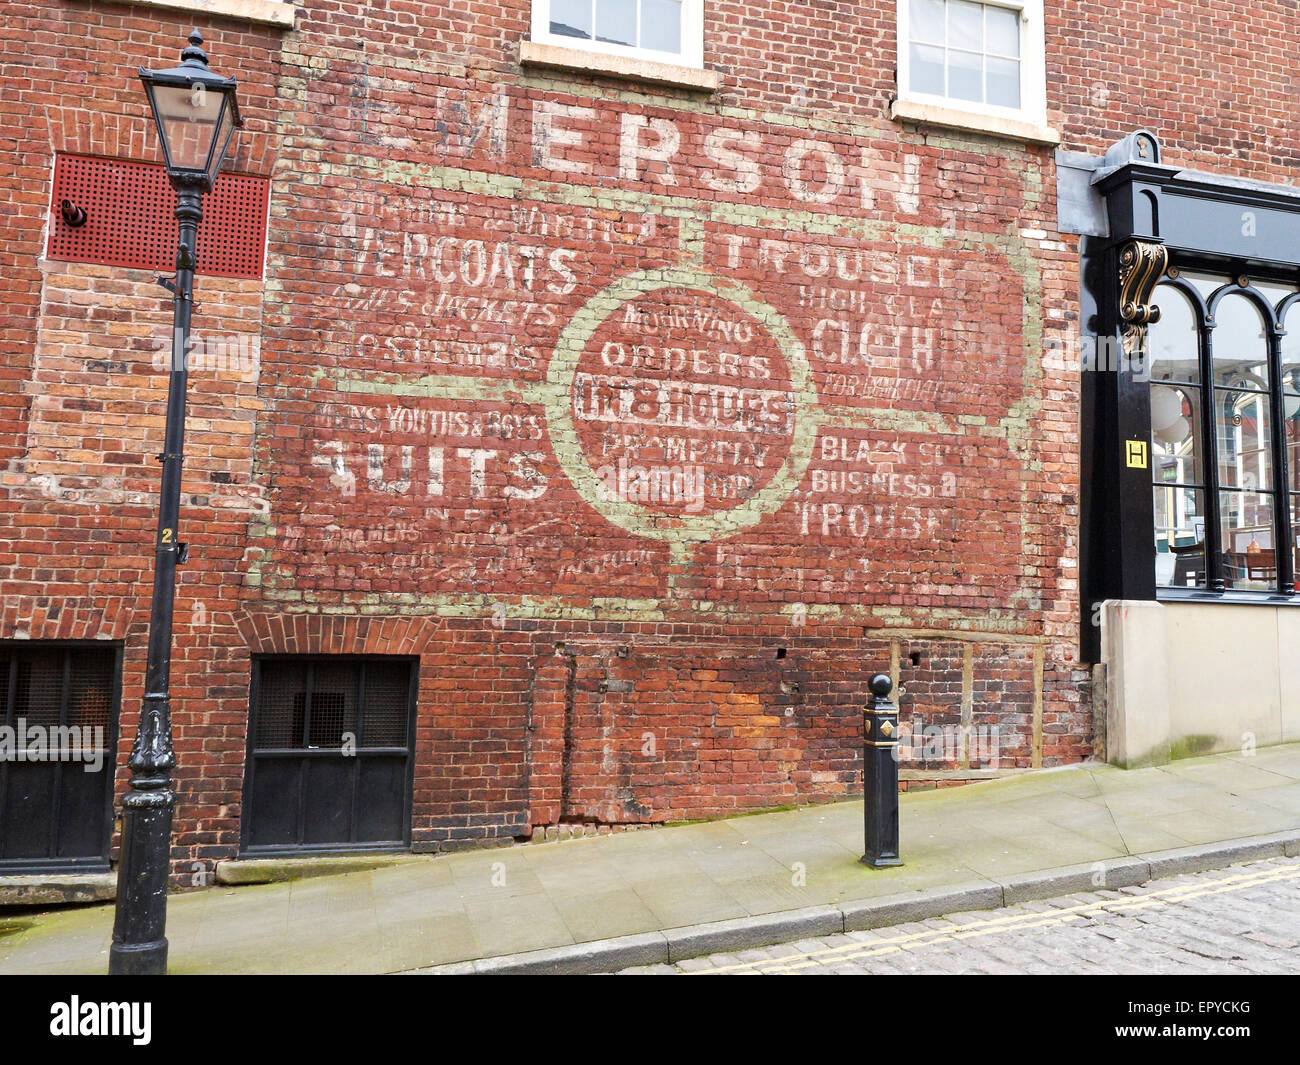 Old fashioned advert on outside shop wall in Stockport UK Stock Photo